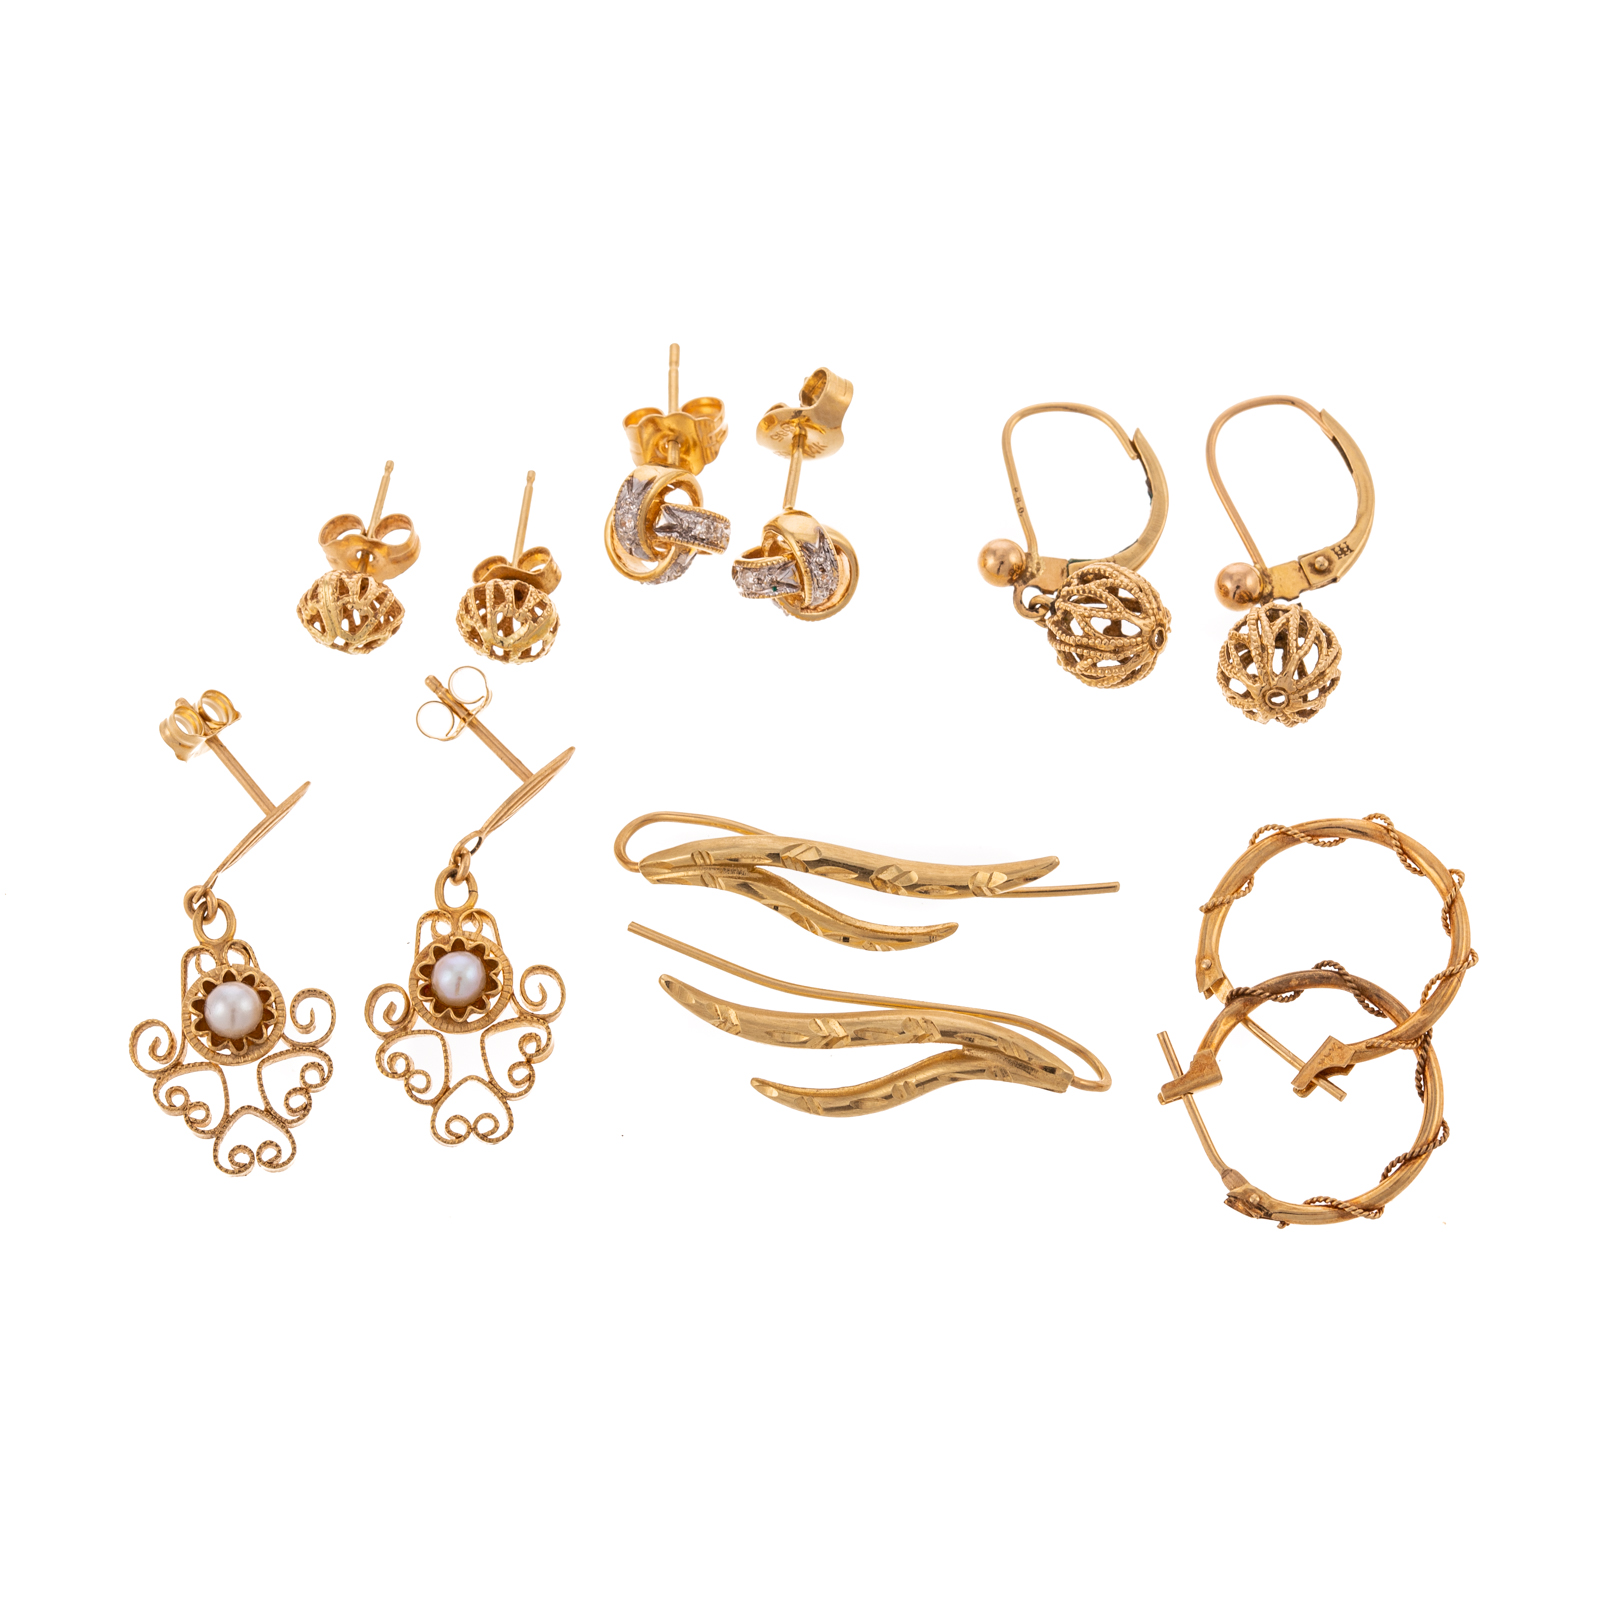 A COLLECTION OF SIX EARRINGS IN 287c87